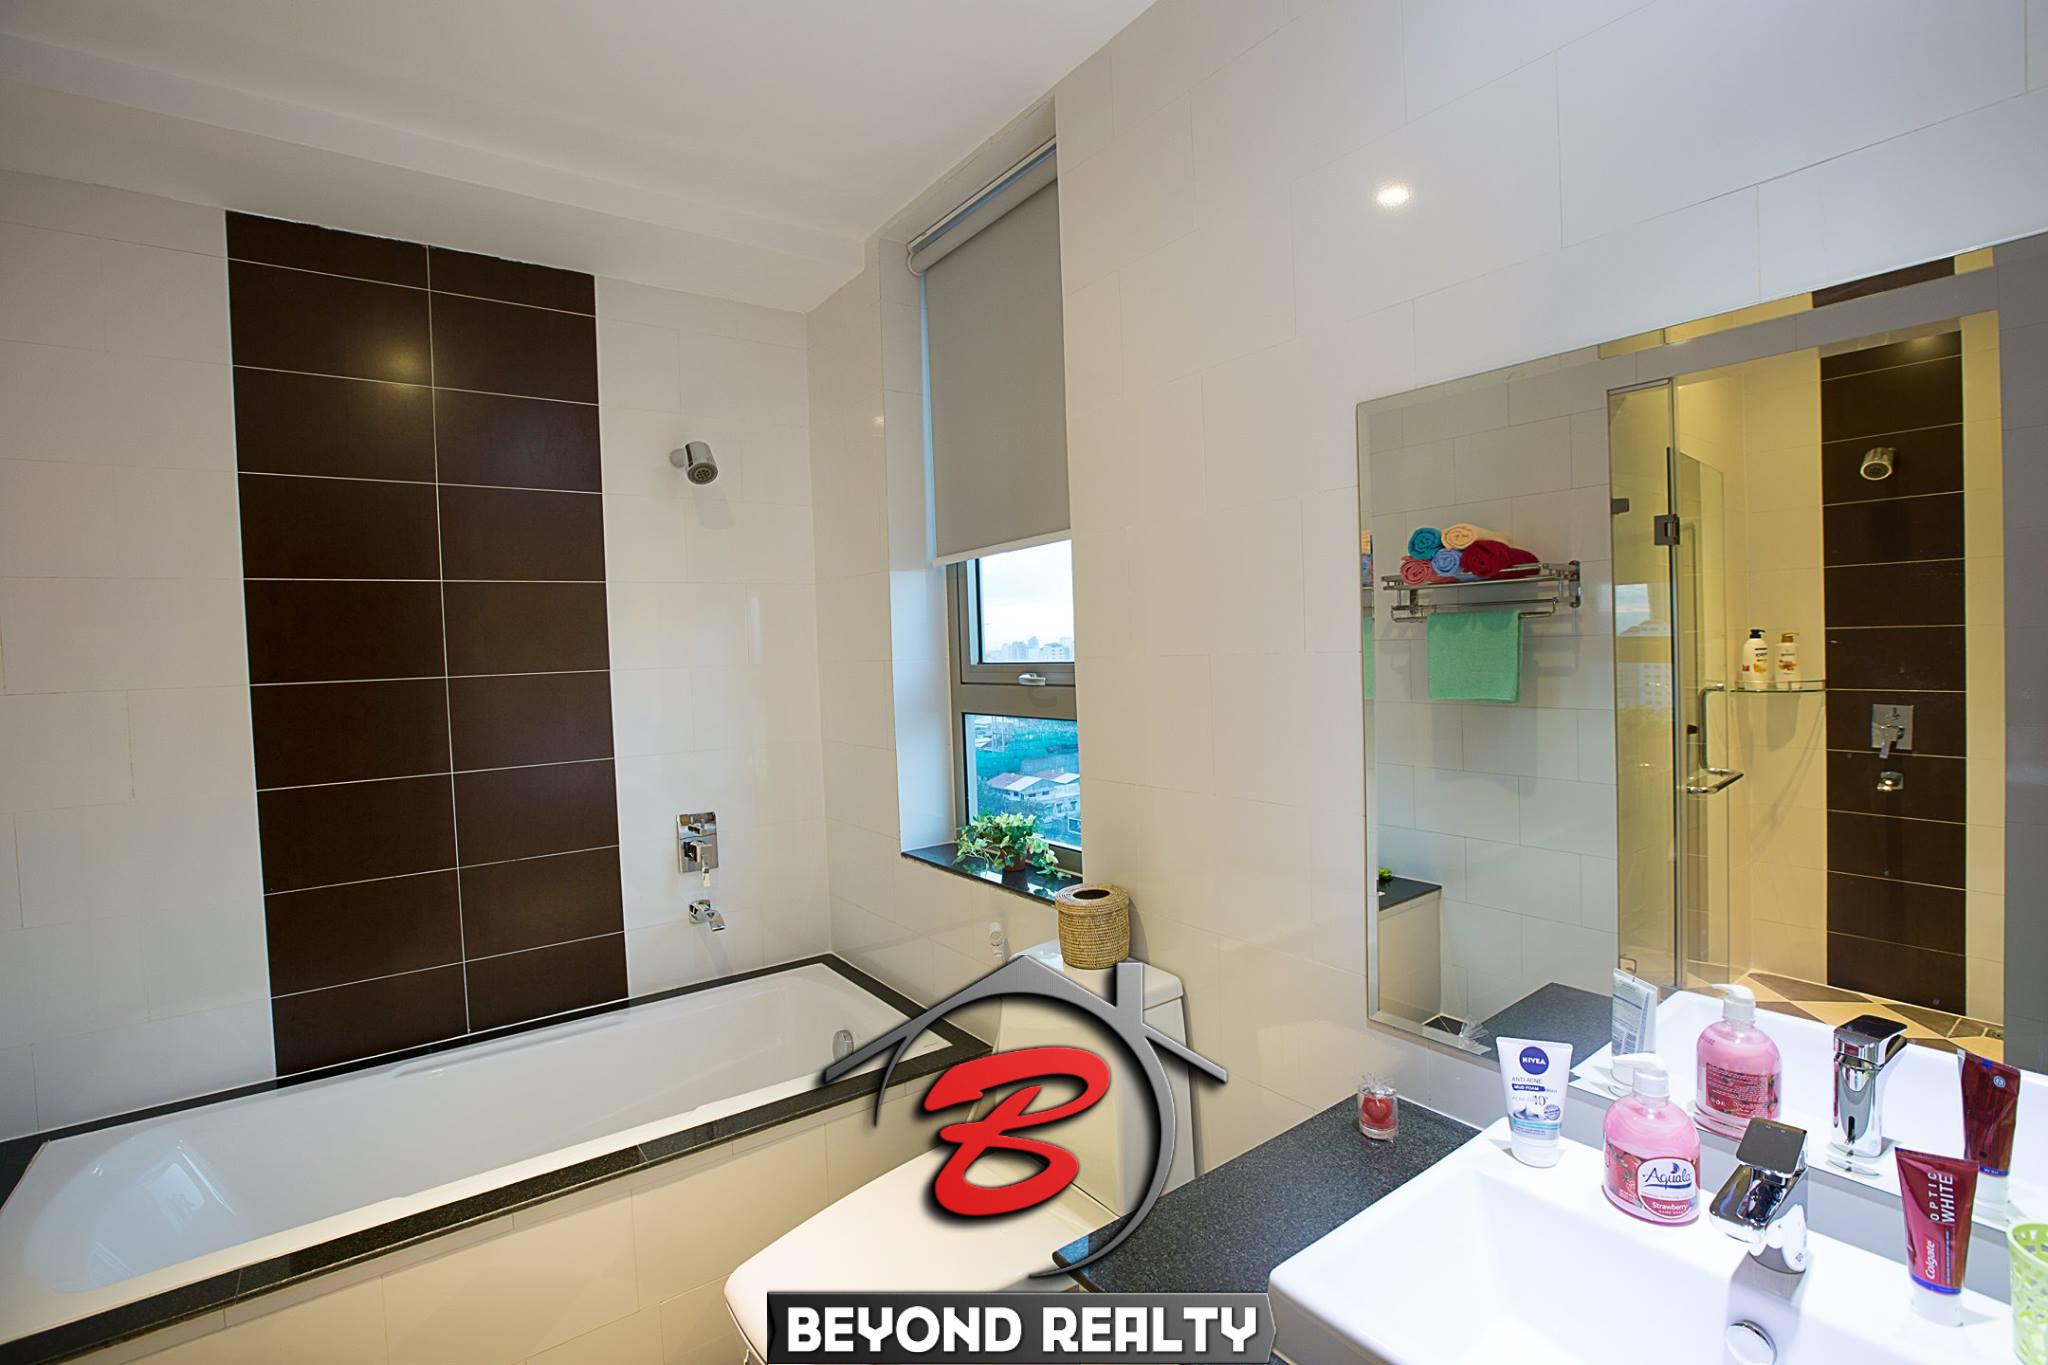 the bathroom of the 1br luxury serviced apartment for rent in BKK1 Phnom Penh Cambodia